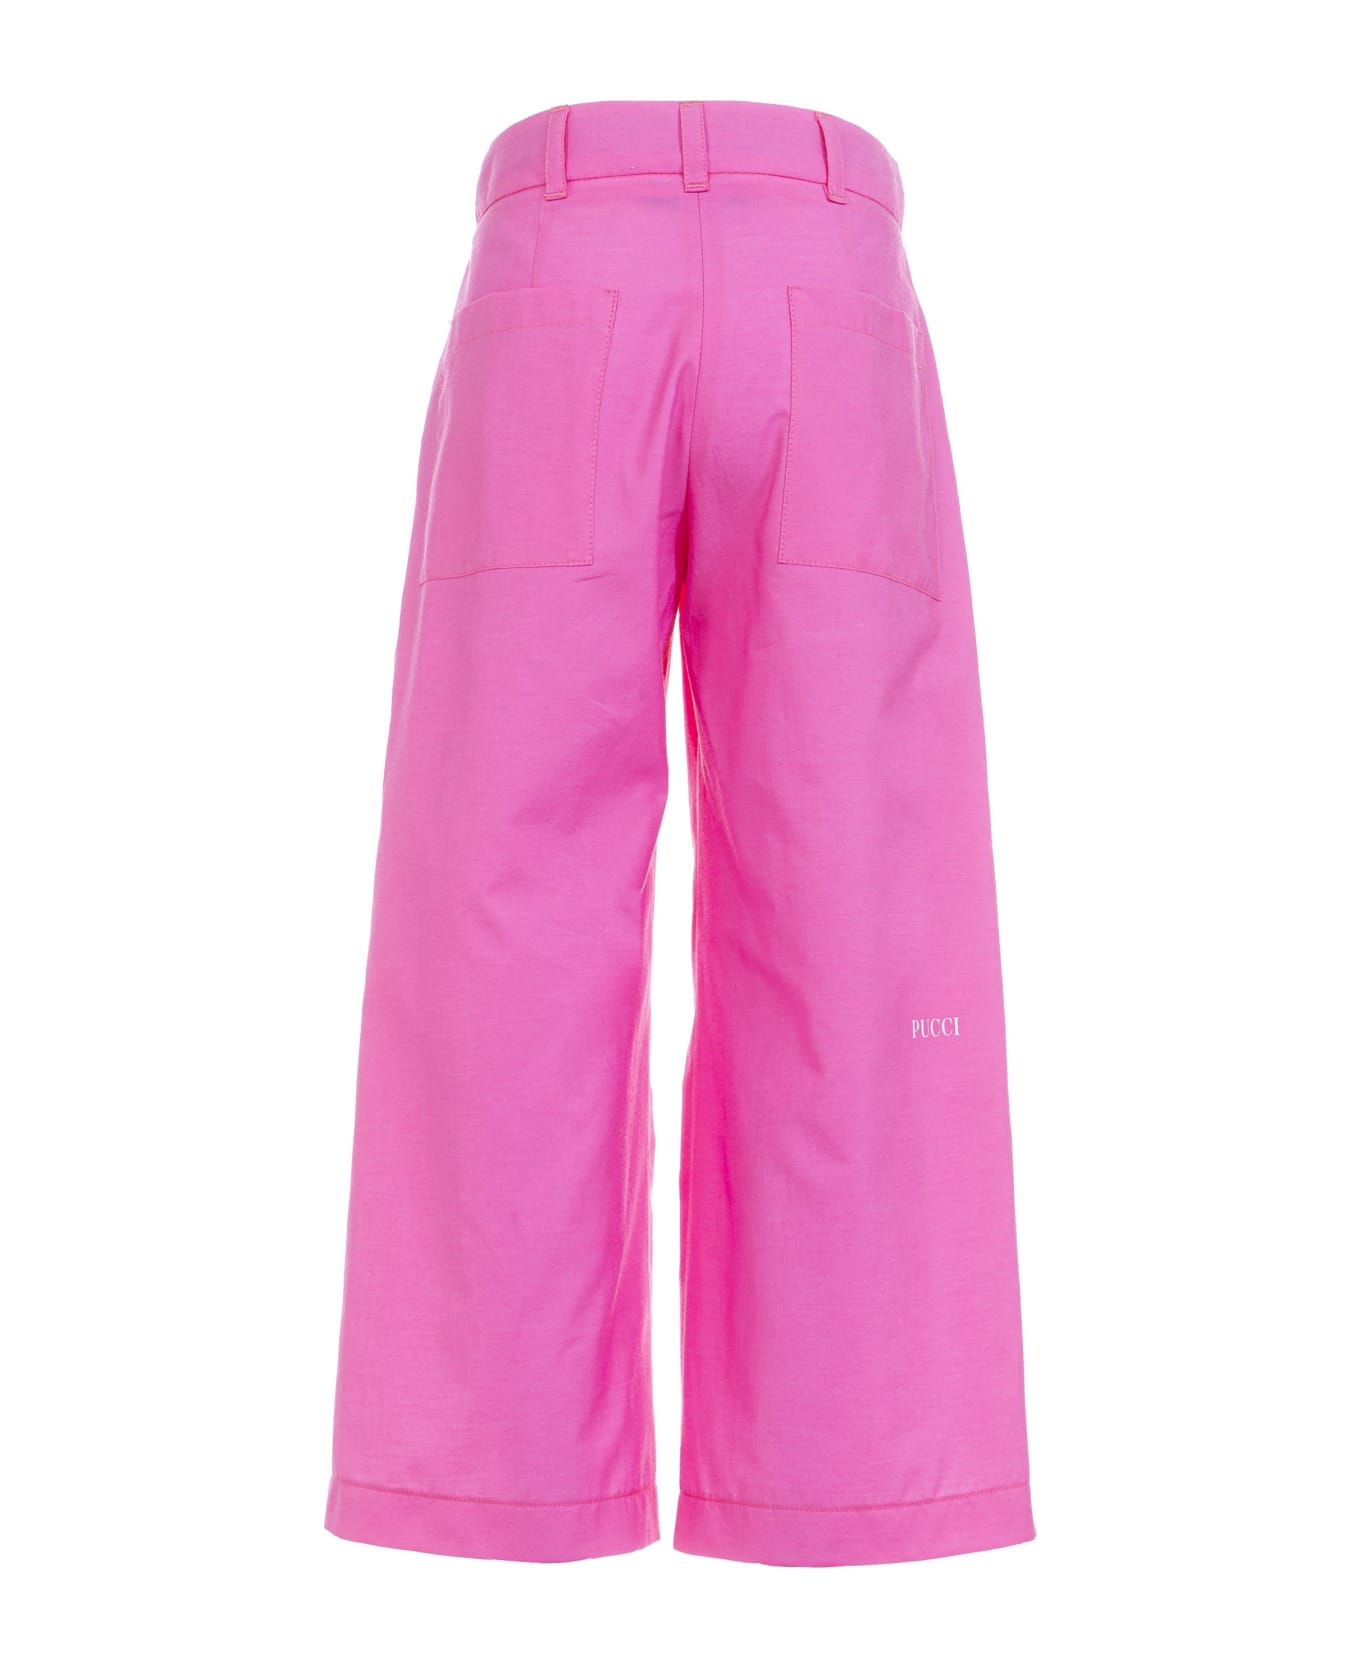 Pucci High Waisted Trousers - Fucsia